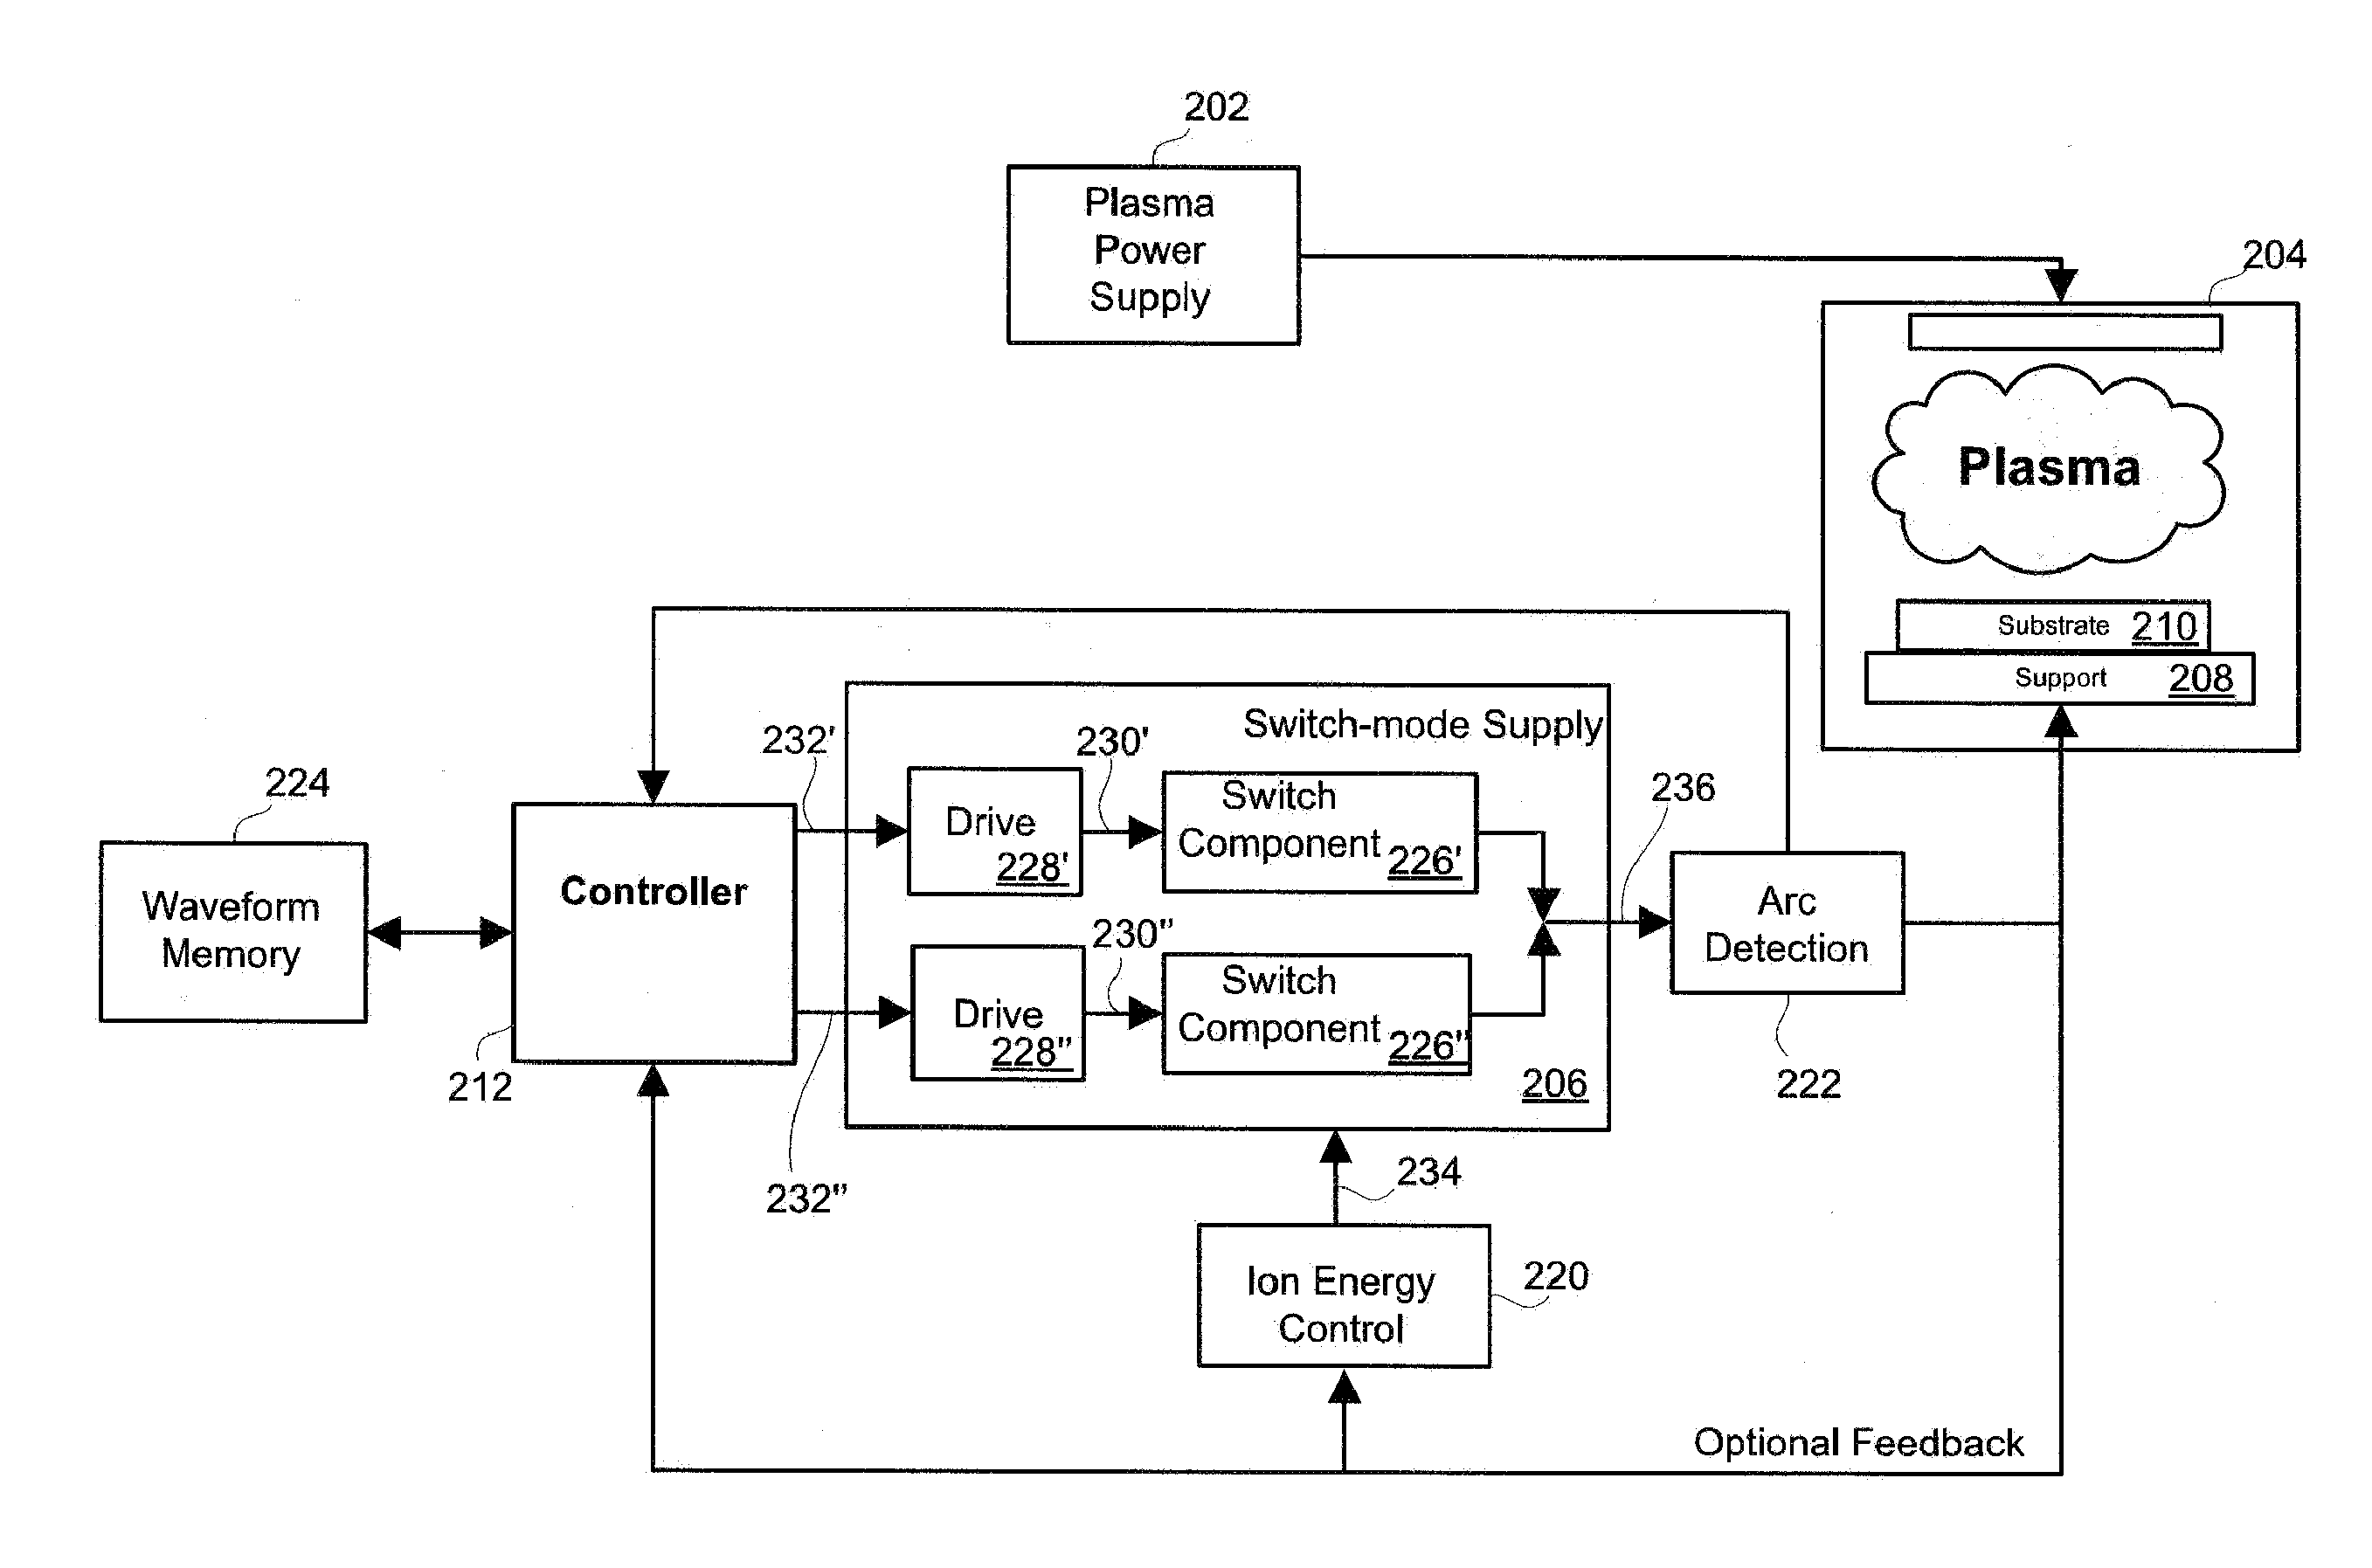 Wafer Chucking System for Advanced Plasma Ion Energy Processing Systems